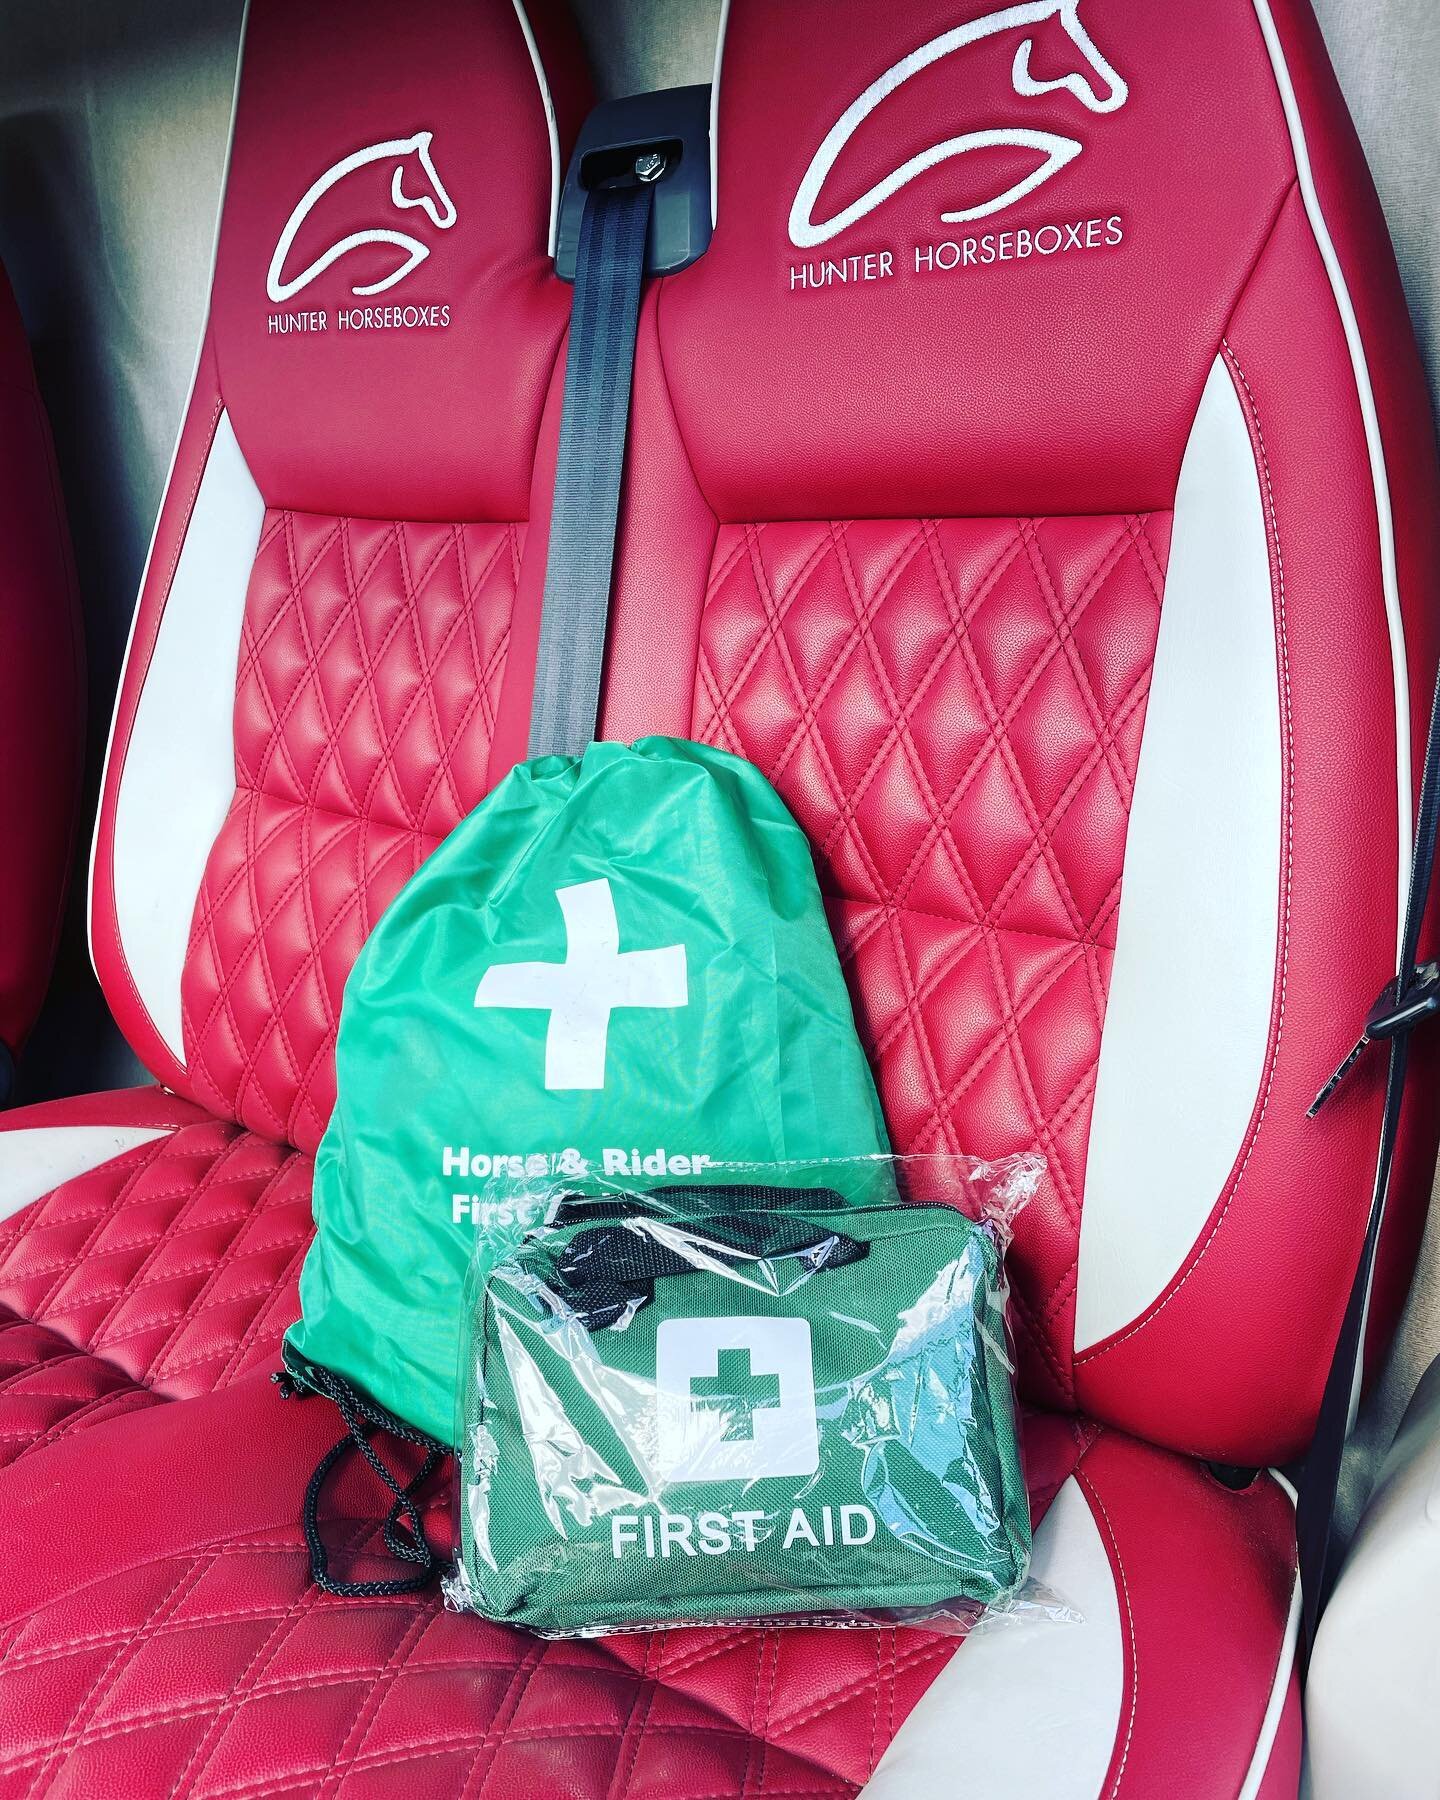 ⛑⛑Both of our Horseboxes are equipped with First Aid kits for both you and your horse. We very much hope you never need to make use of them, but they&rsquo;re there if ever you do
&bull;
Spring and Summer dates are booking up fast, so make sure you d